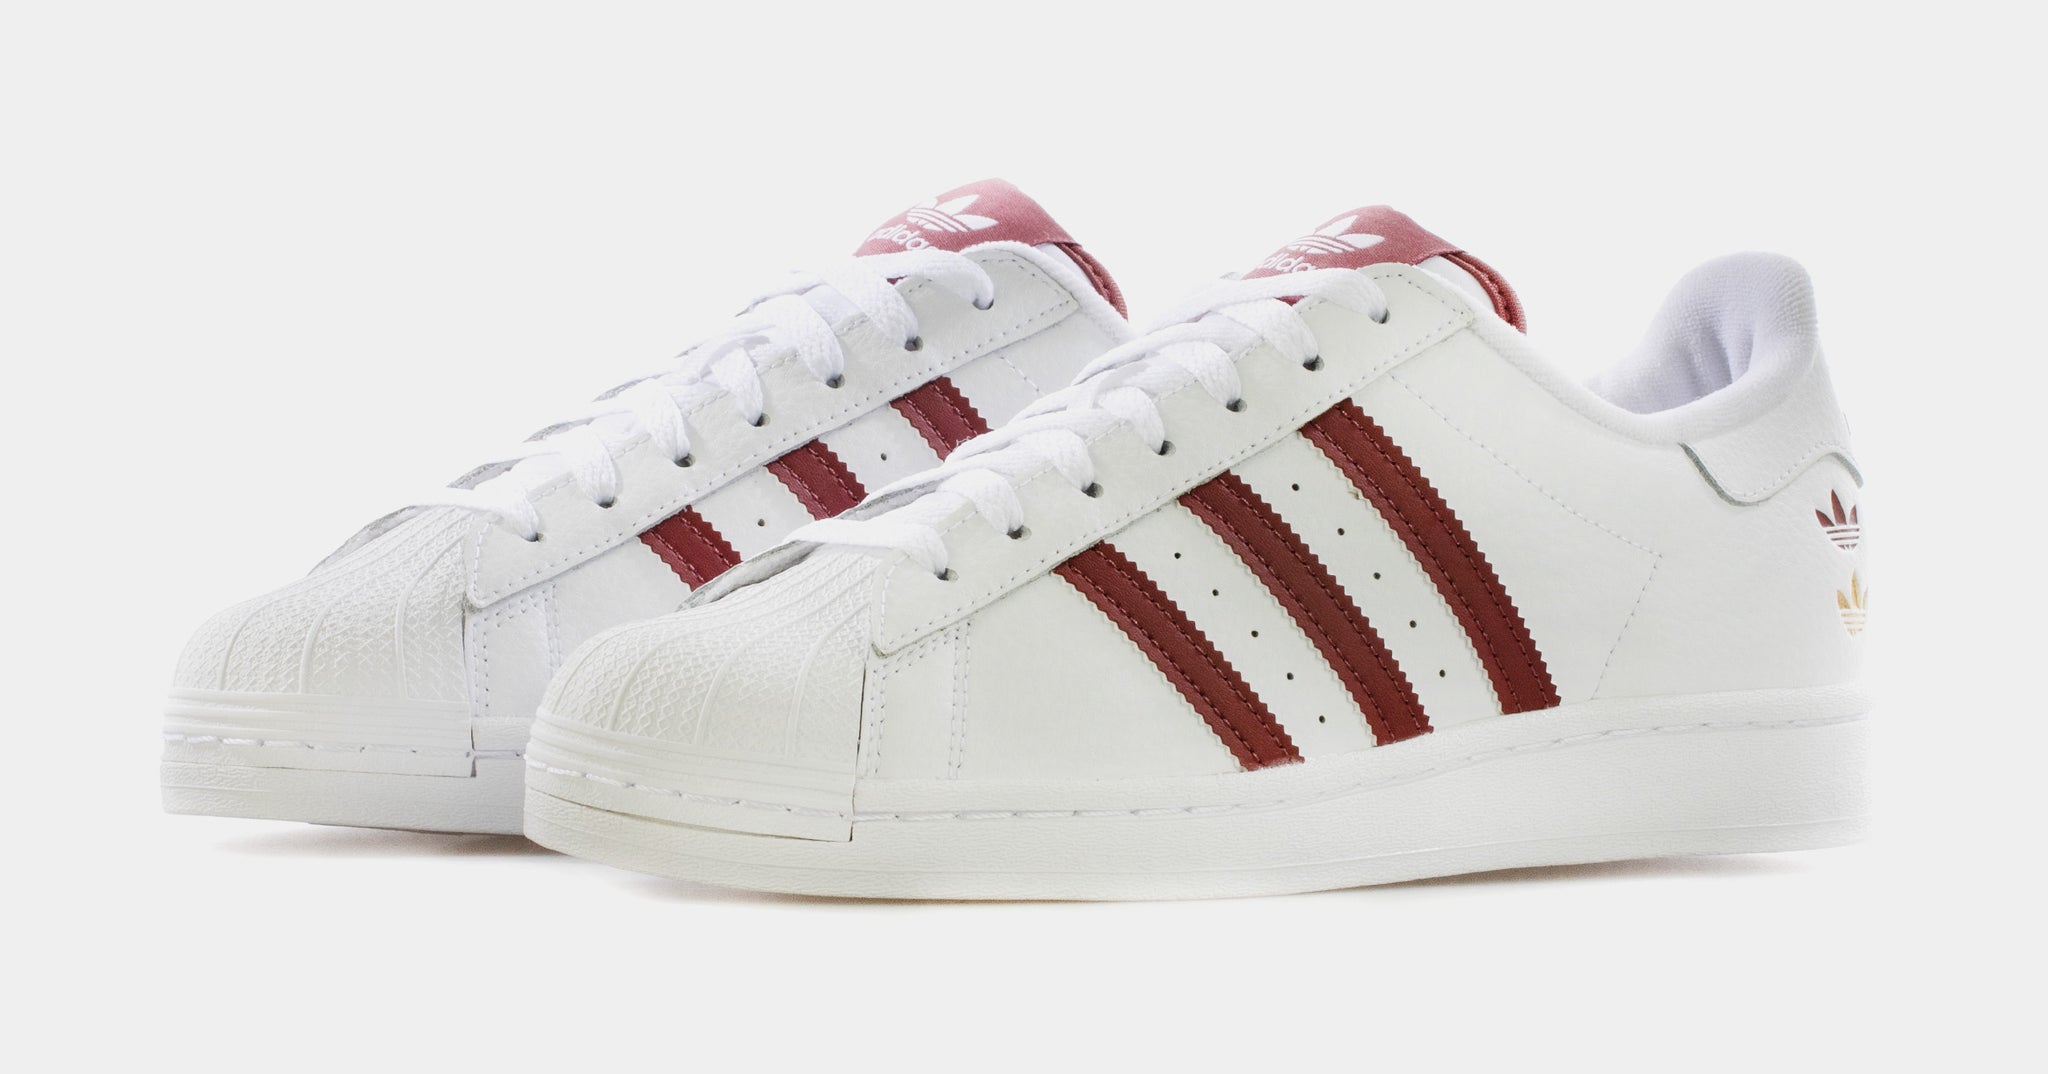 adidas Superstar Mens Lifestyle White Burgundy Red GY0976 – Shoe Palace